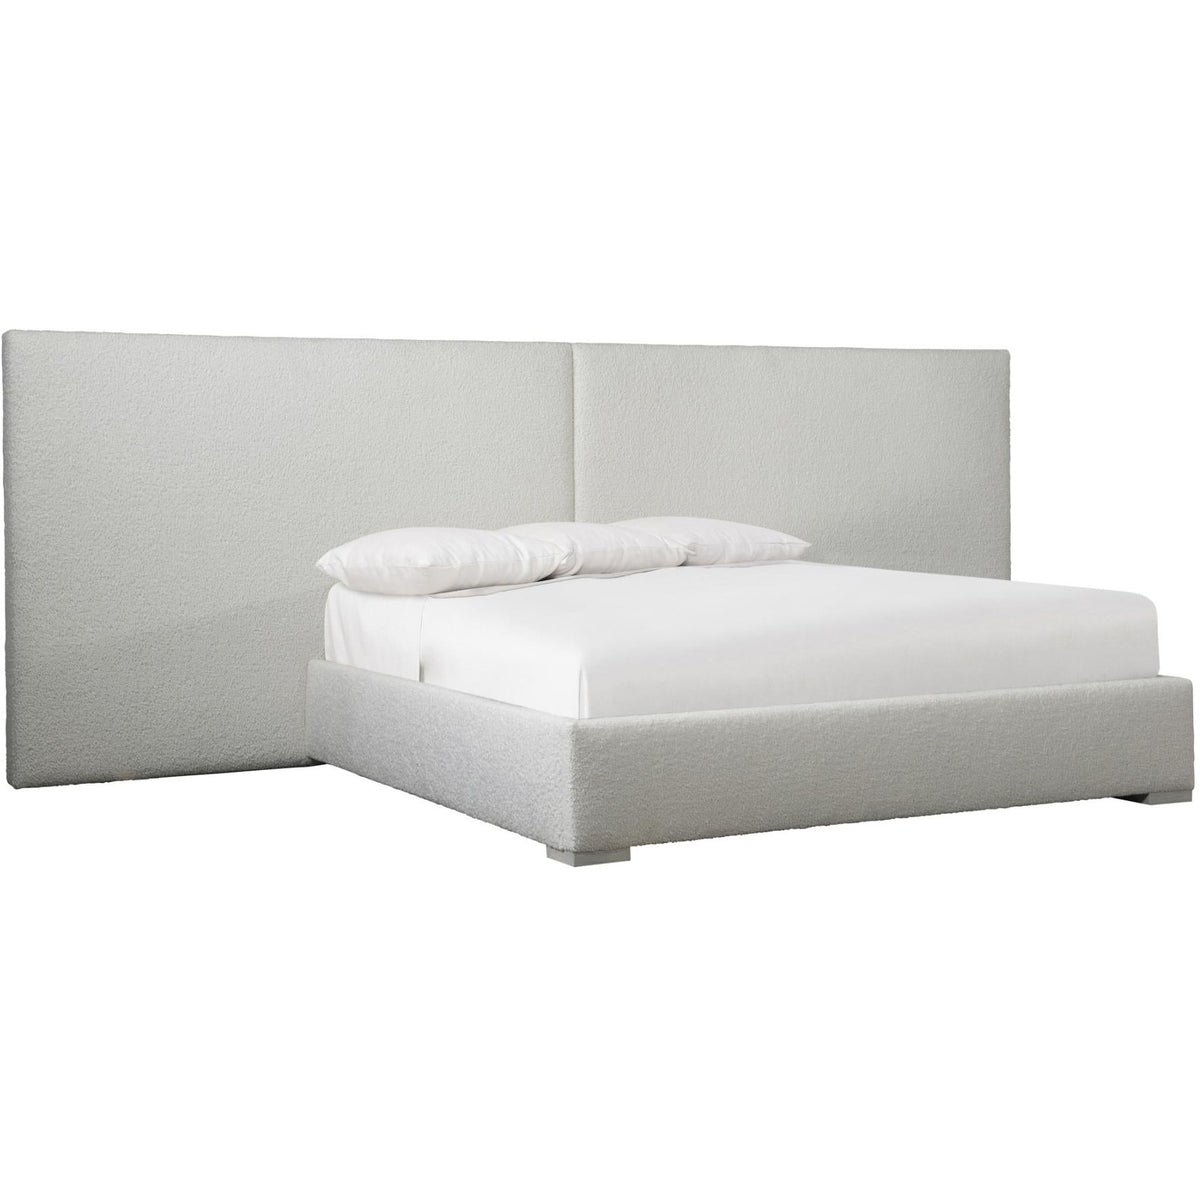 Solaria King Wall Bed